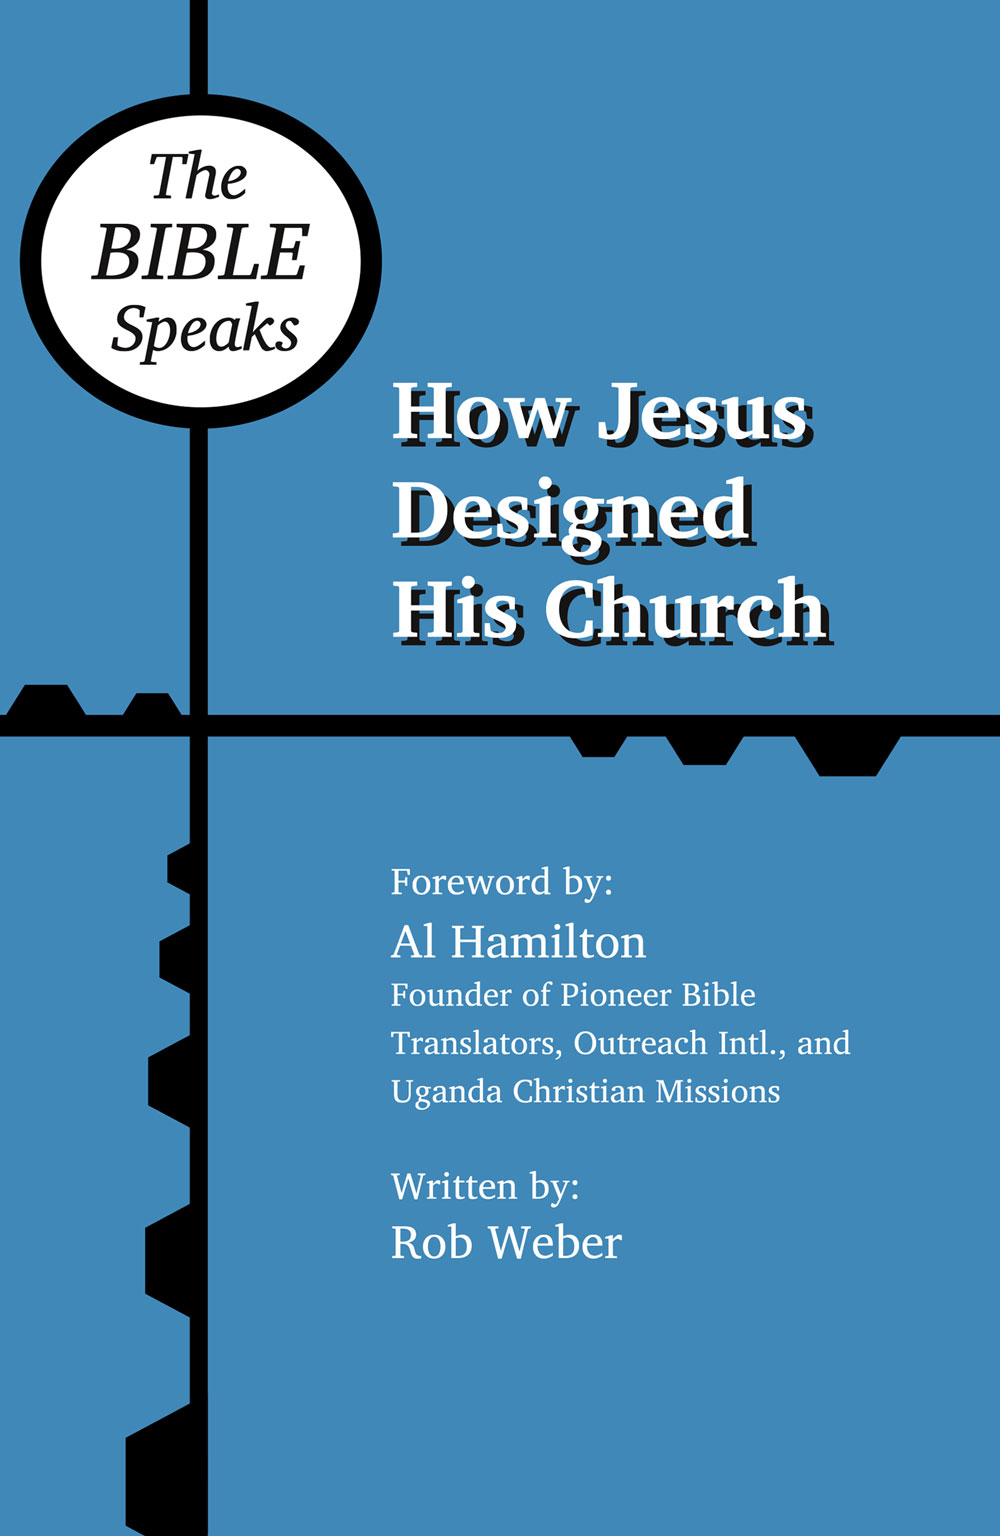 How Jesus Designed His Church front book cover